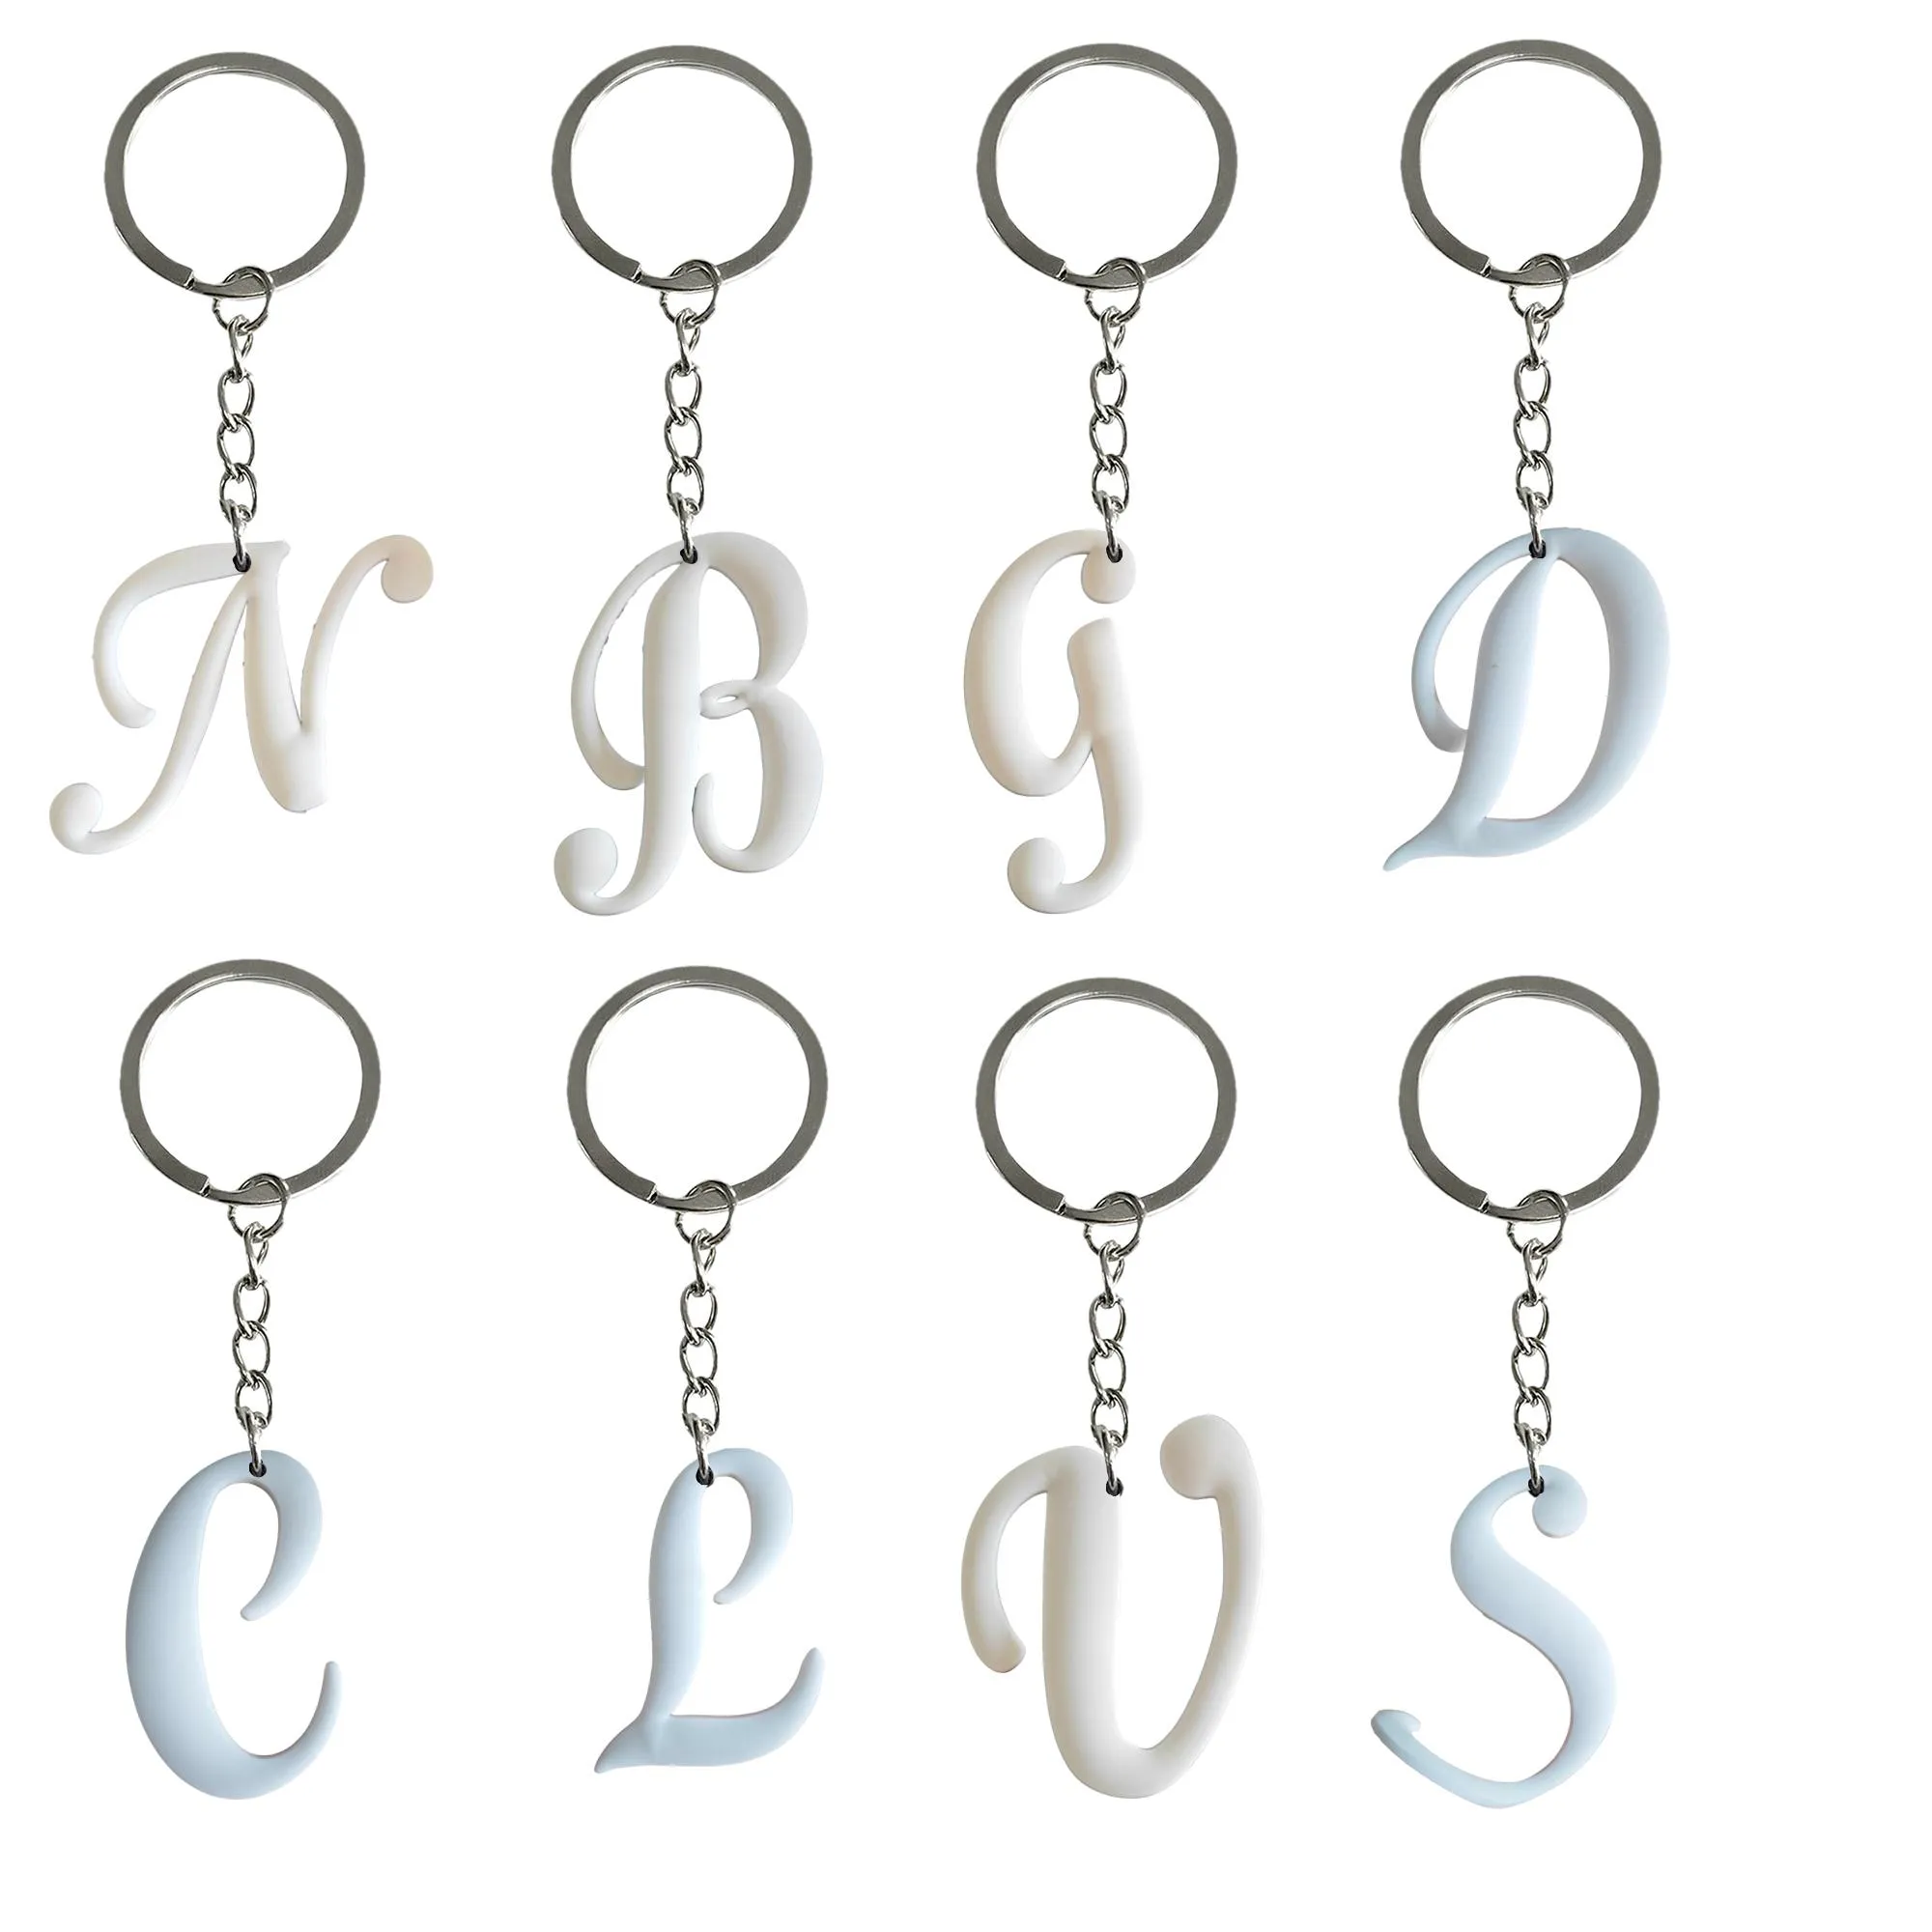 Charms White Large Letters Keychain Keychains Party Favors Key Chain Ring Christmas Gift For Fans Kids Keyring Suitable Schoolbag Pend Otnls